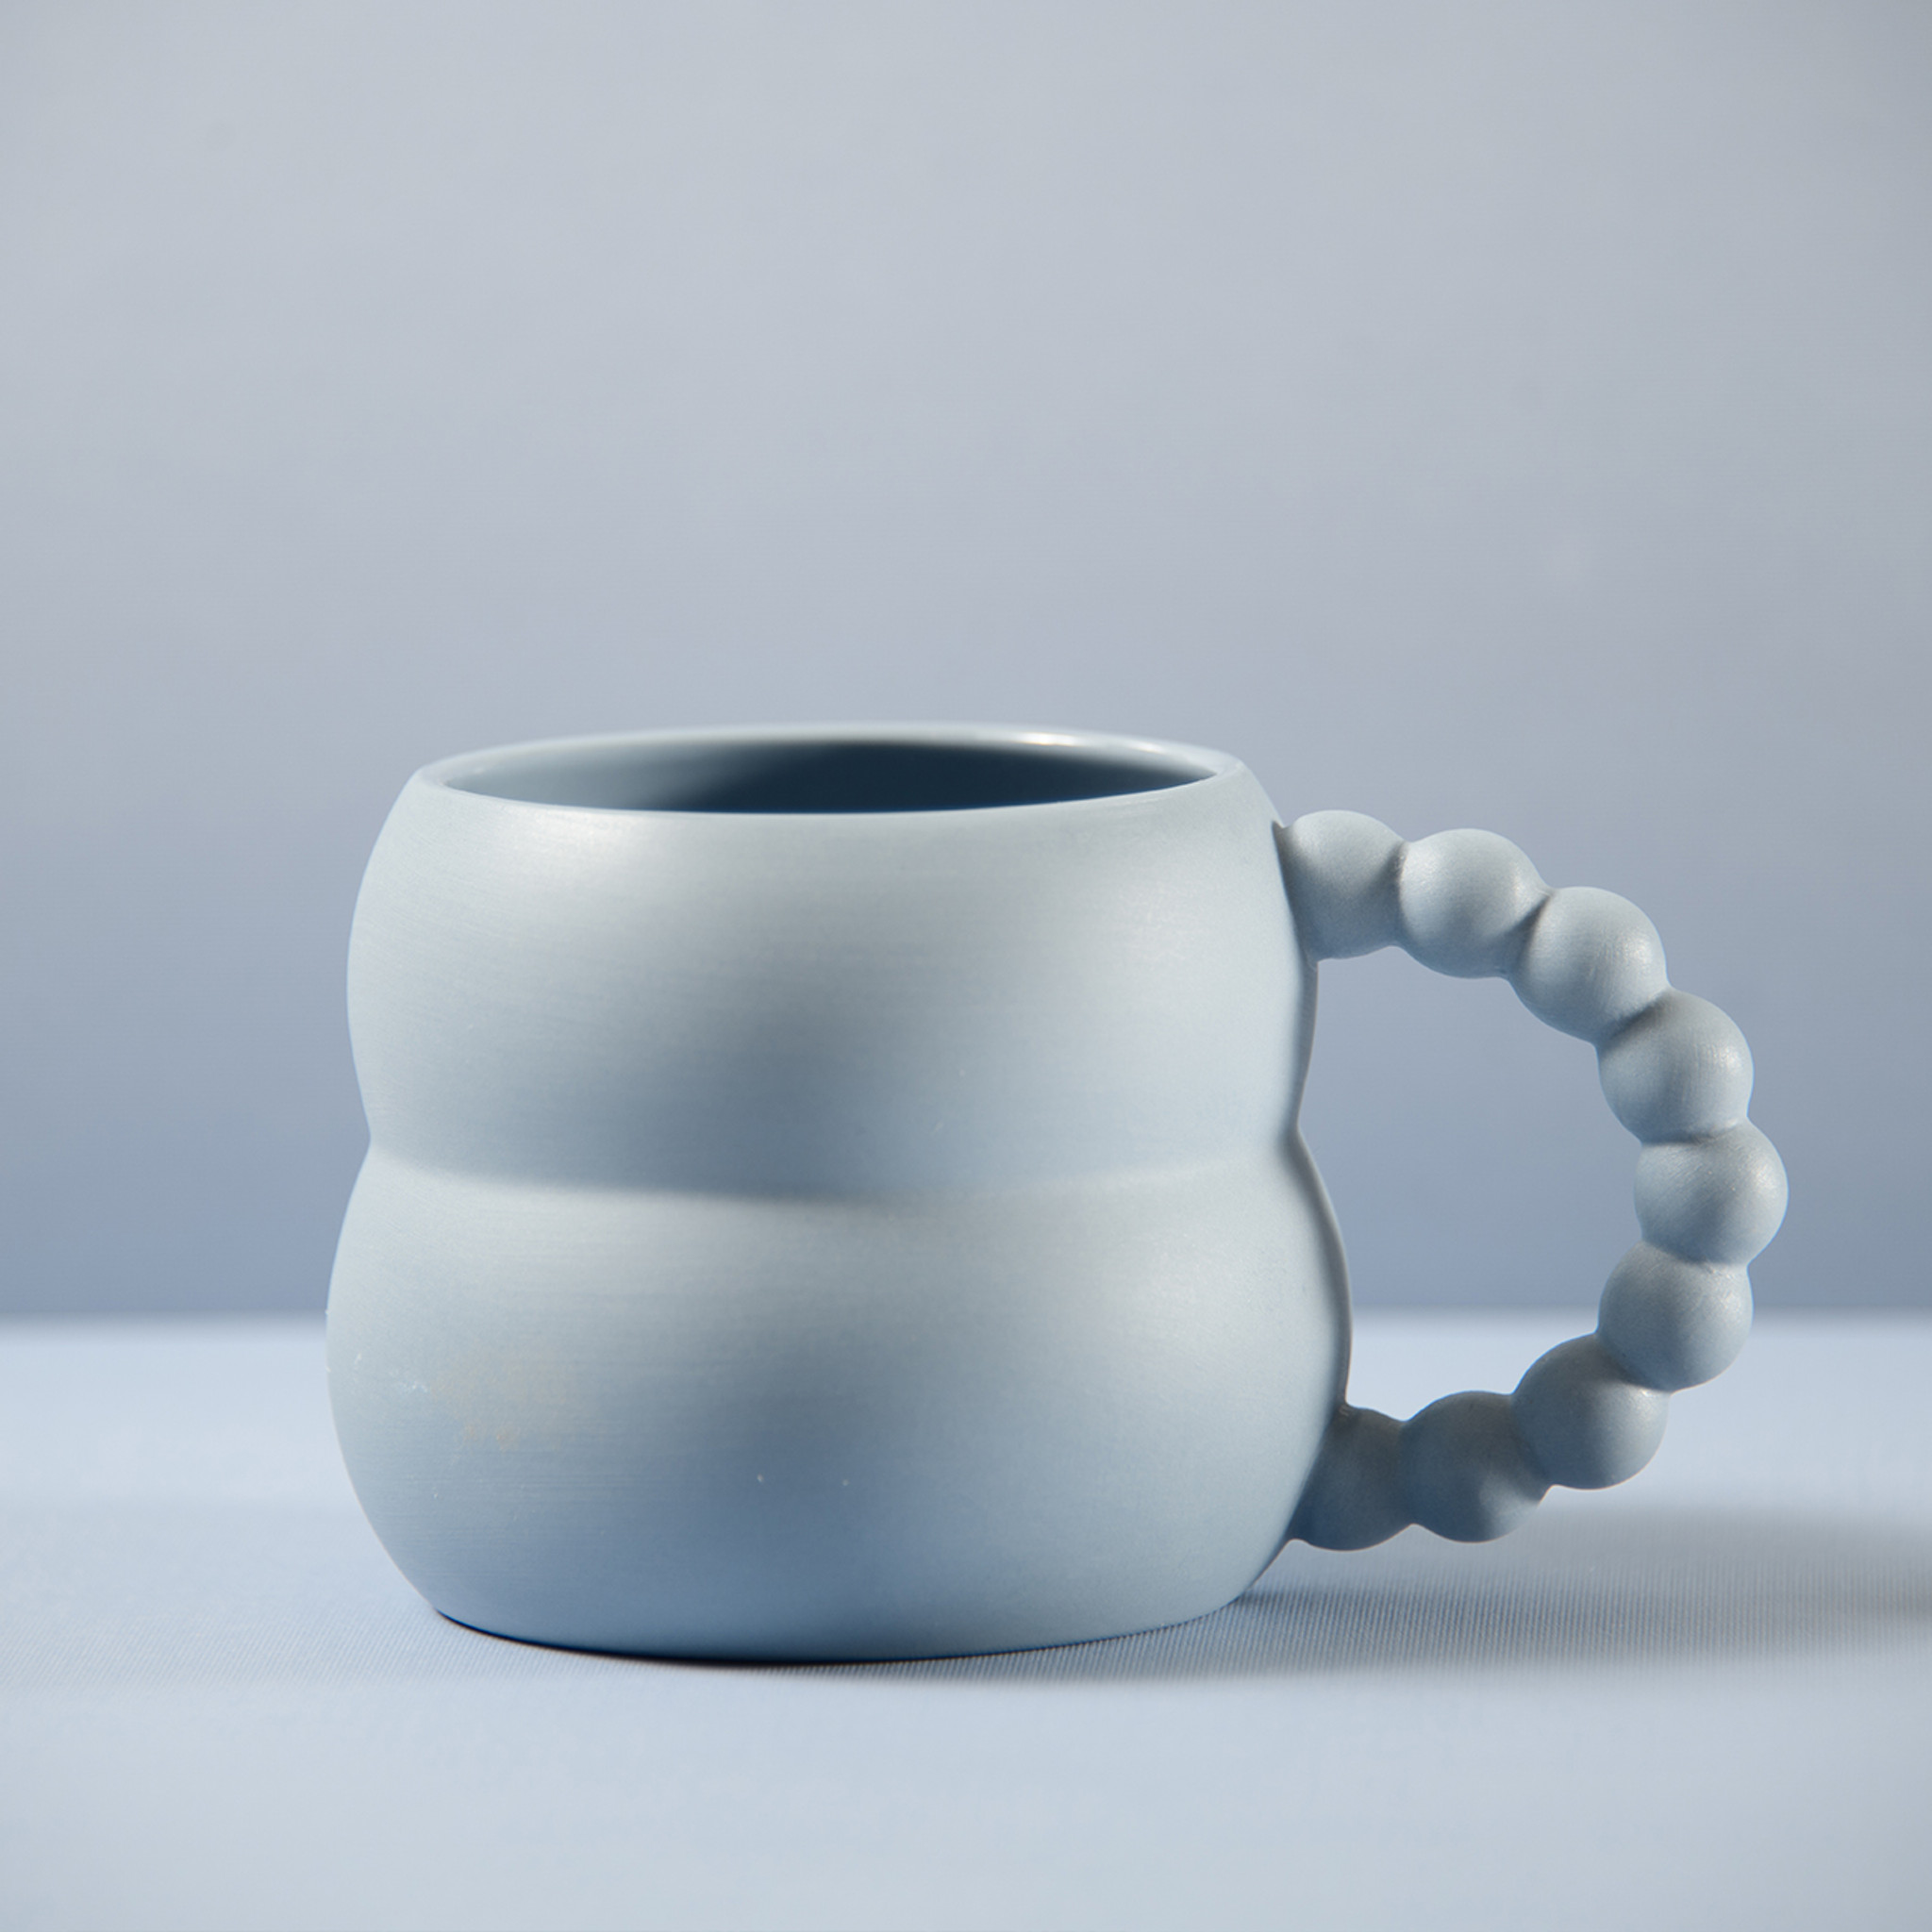 https://cdn11.bigcommerce.com/s-ps4uyod7mi/images/stencil/2048x2048/products/2105/2437/Blue_mug_with_whimsical_beadlike_handles_tan_background_1280__50525.1665244602.jpg?c=2